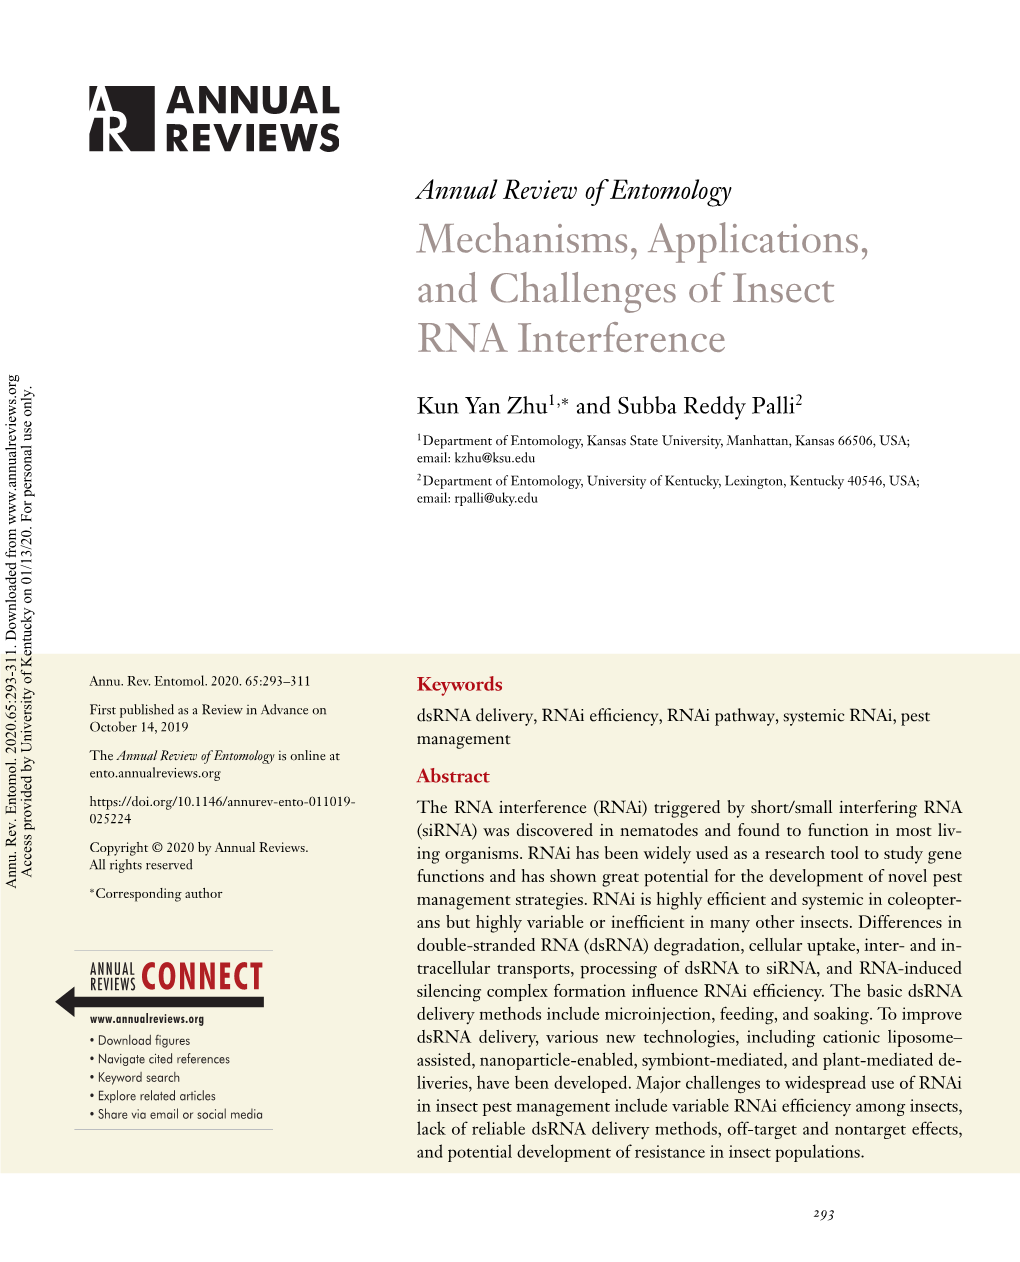 Mechanisms, Applications, and Challenges of Insect RNA Interference